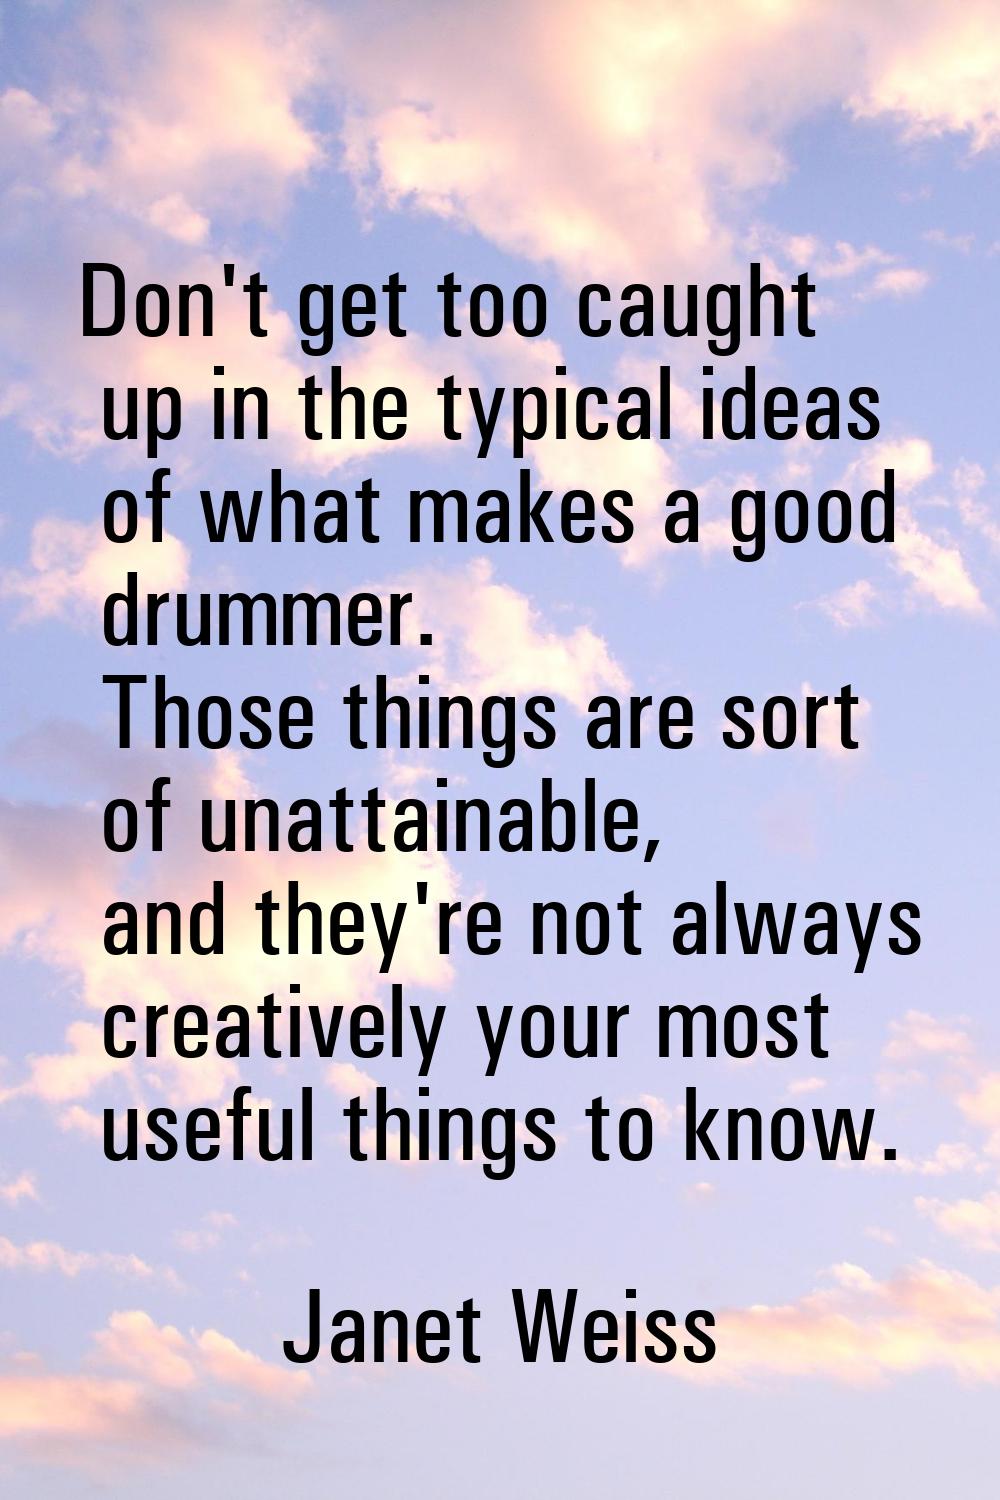 Don't get too caught up in the typical ideas of what makes a good drummer. Those things are sort of